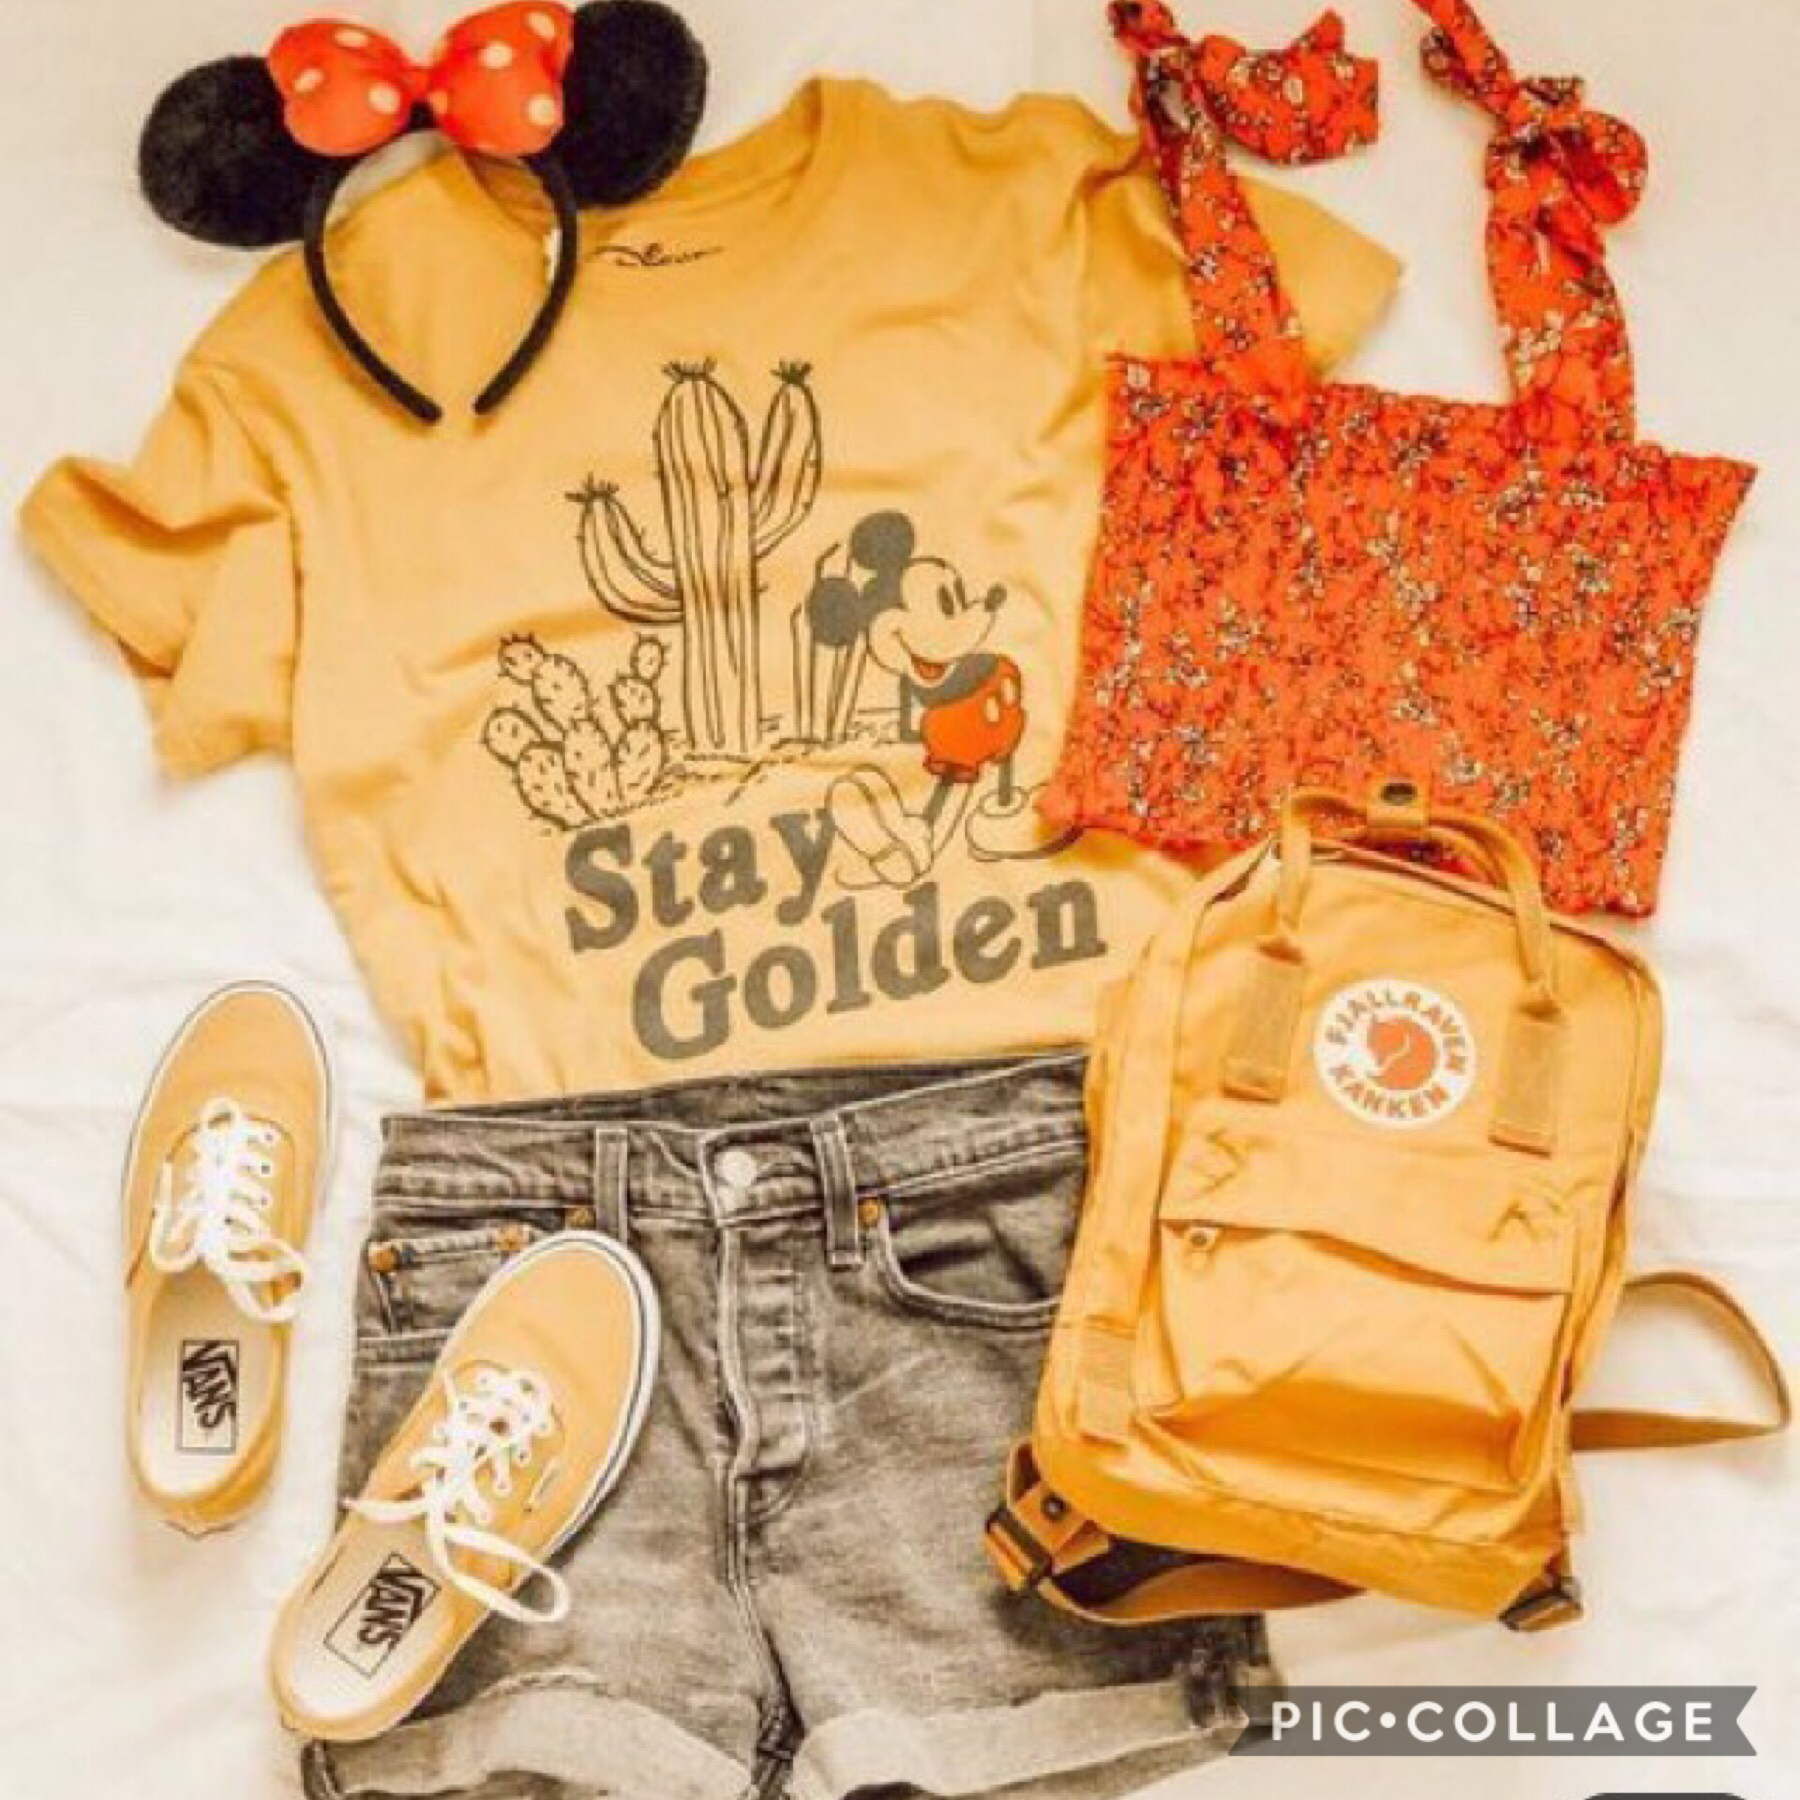 Disney Outfit
3-30-19